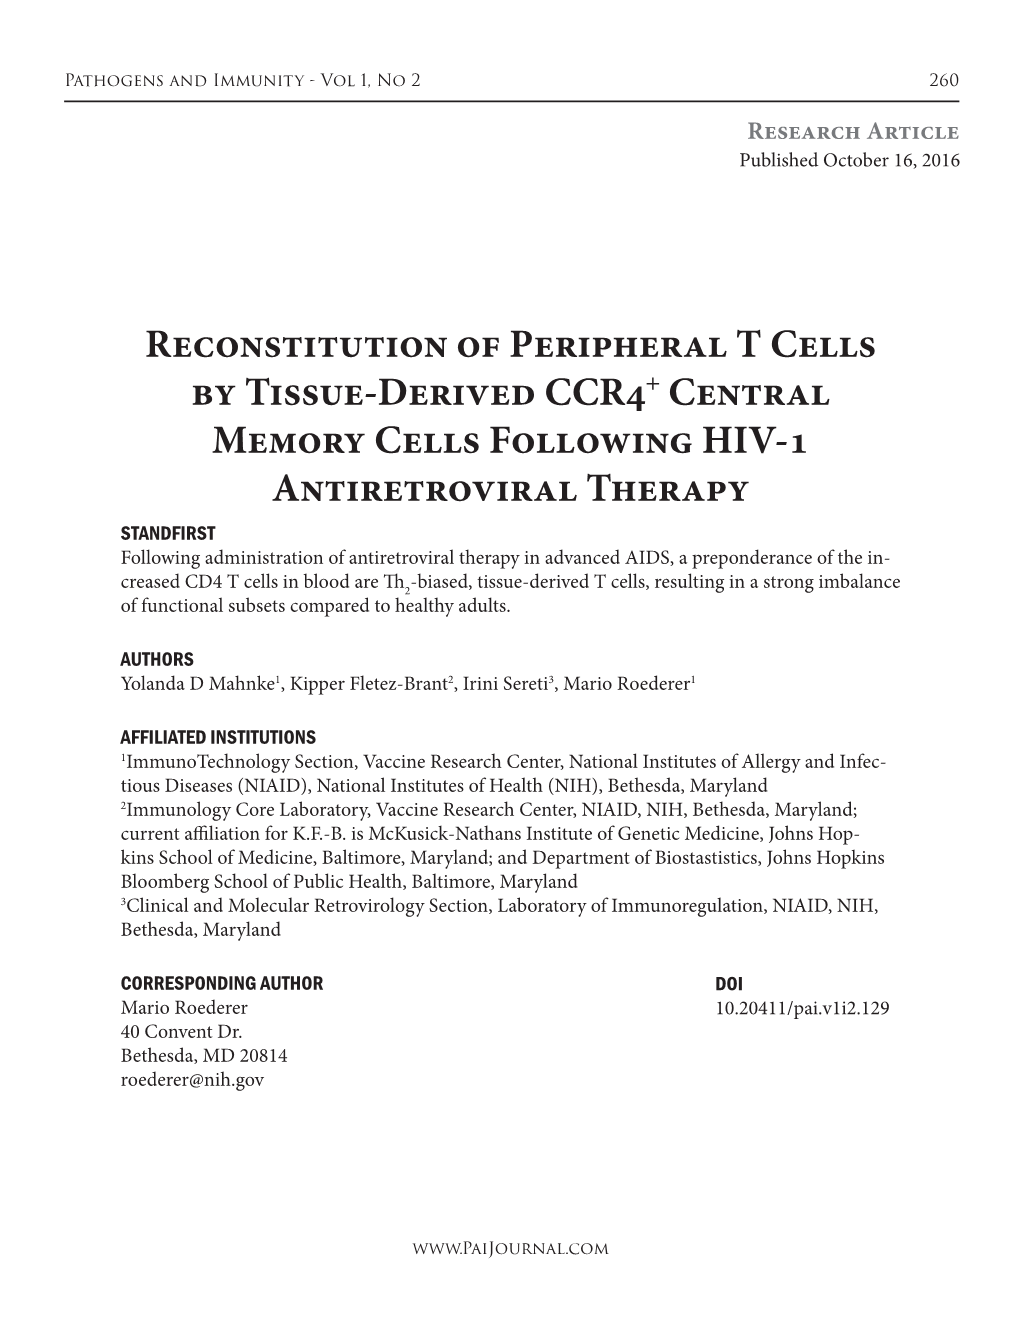 Reconstitution of Peripheral T Cells by Tissue-Derived CCR4+ Central